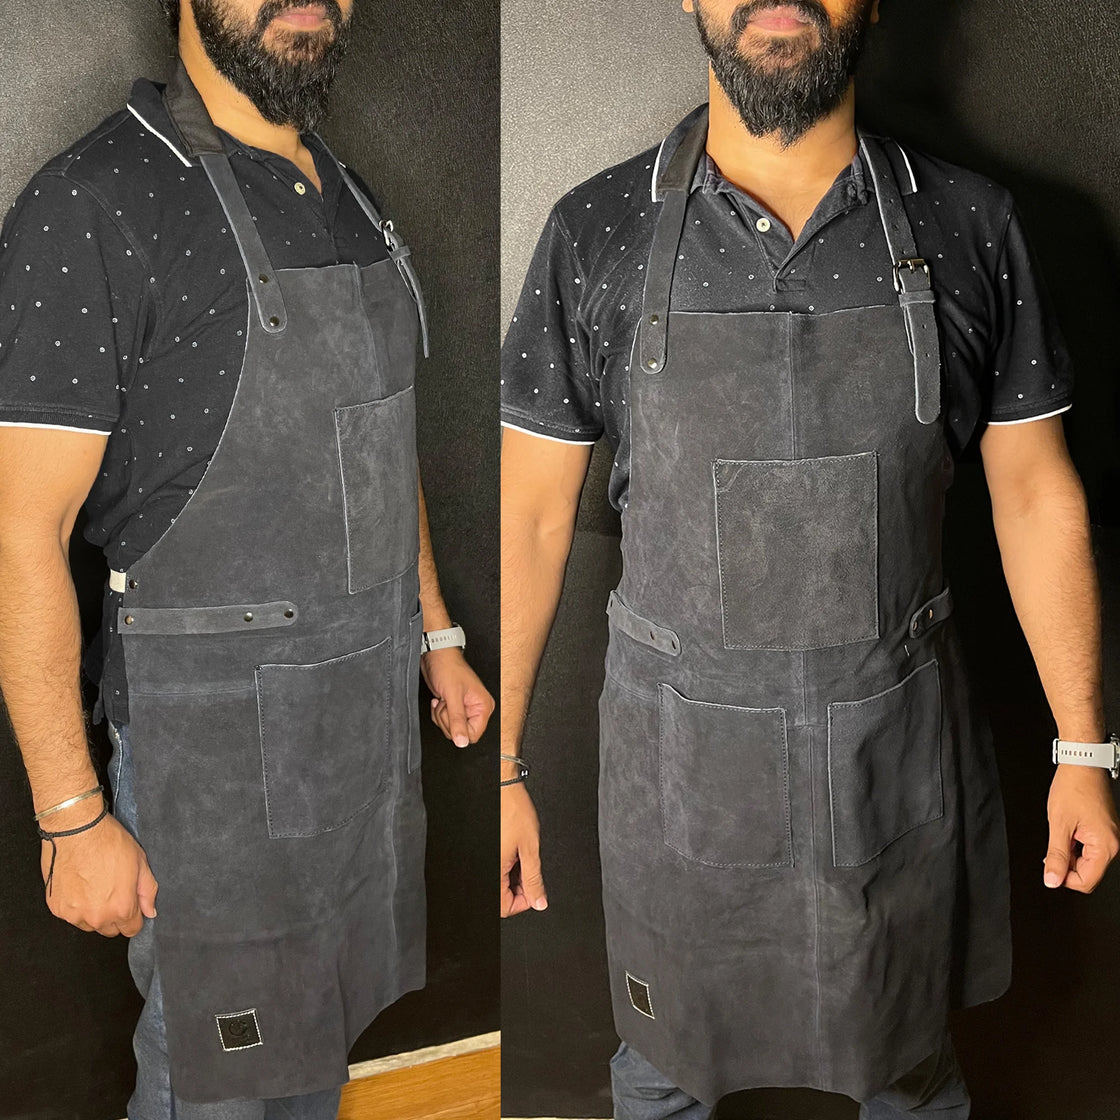 Kuche Leather Grill Work Apron Woodworking Shop Apron (Midnight Blue)